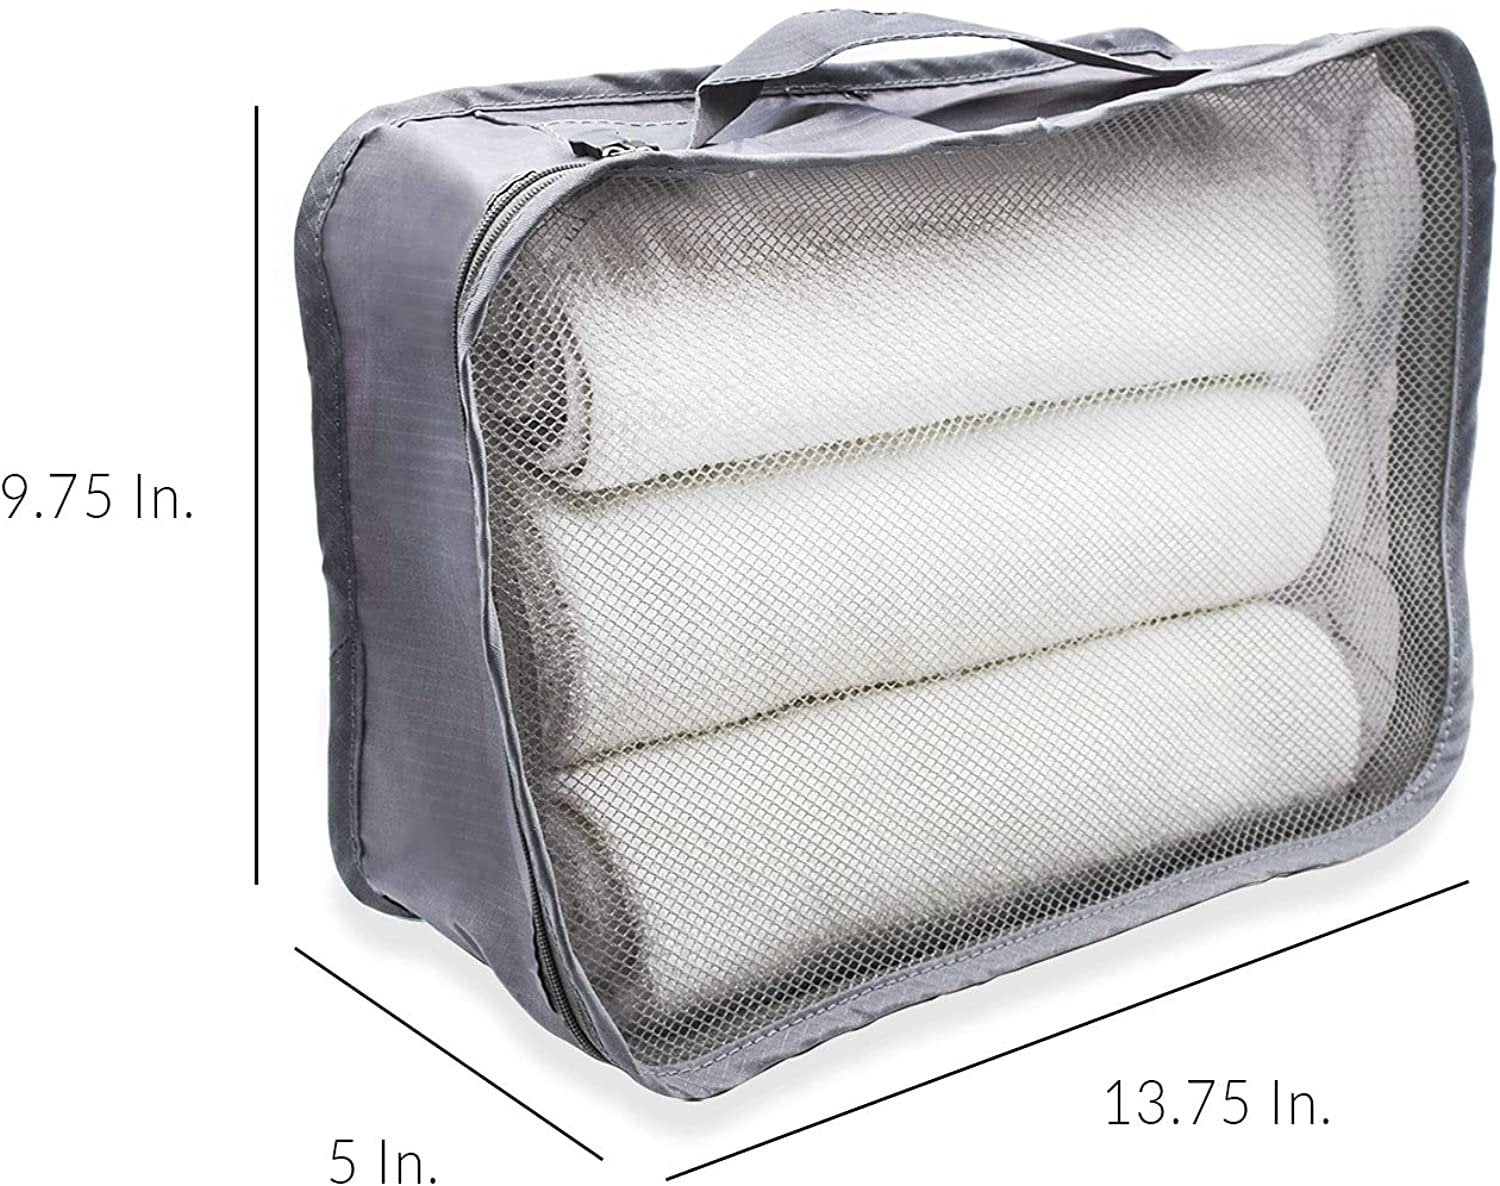 4 Pack Grey Packing Cubes for Travel, Medium Size, Ultralight Nylon Material - Free Shipping